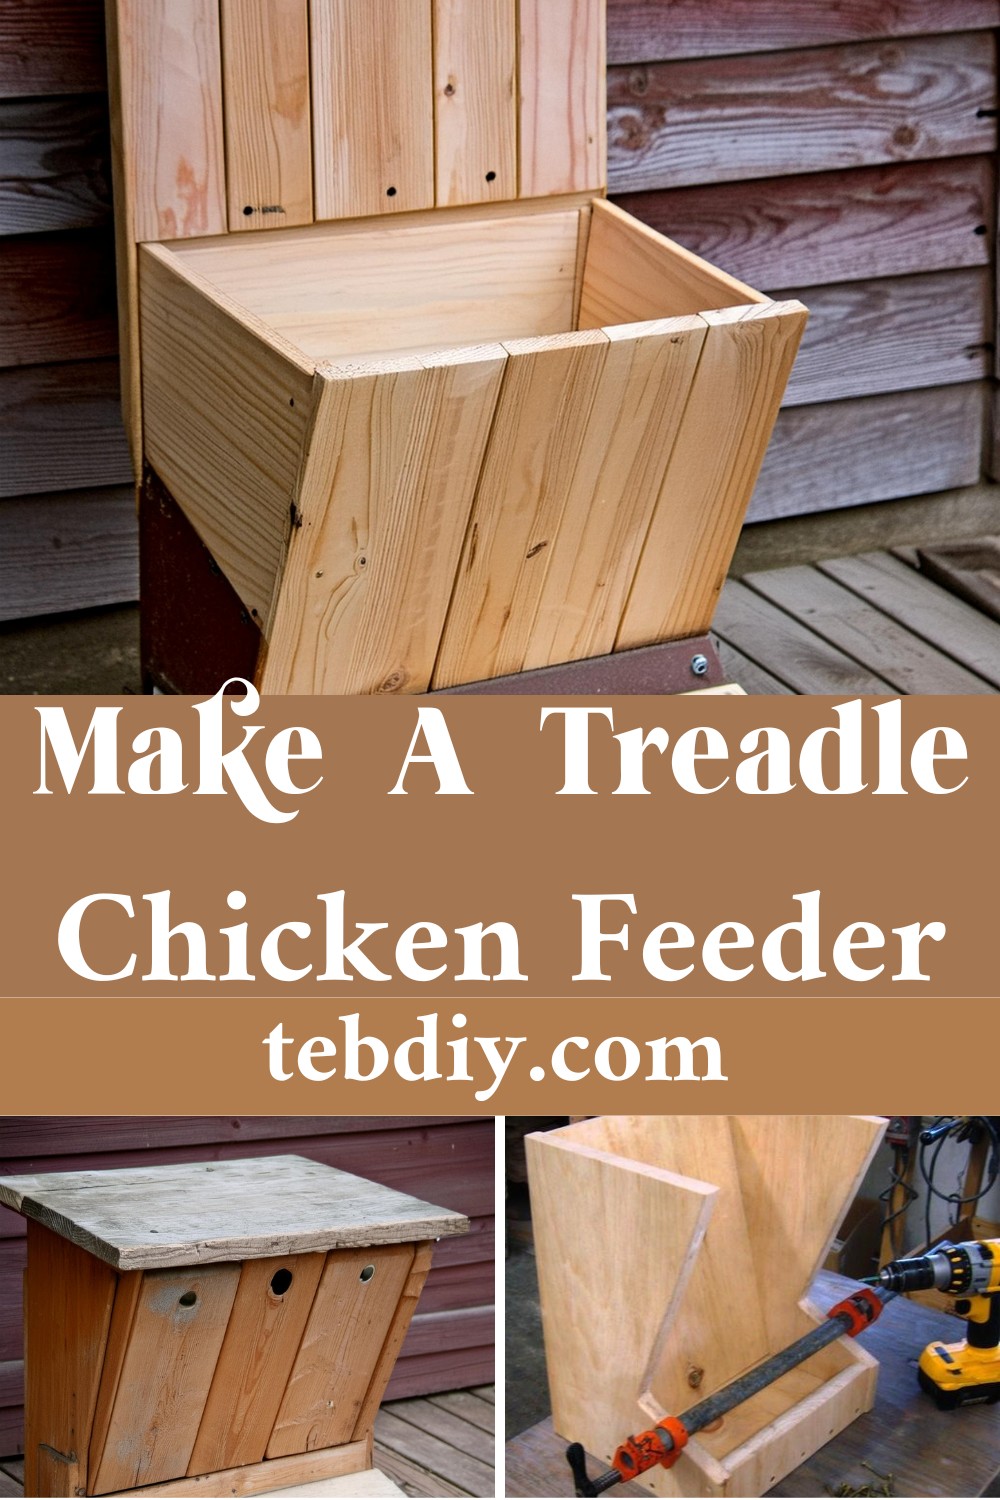 How To Make A Treadle Chicken Feeder